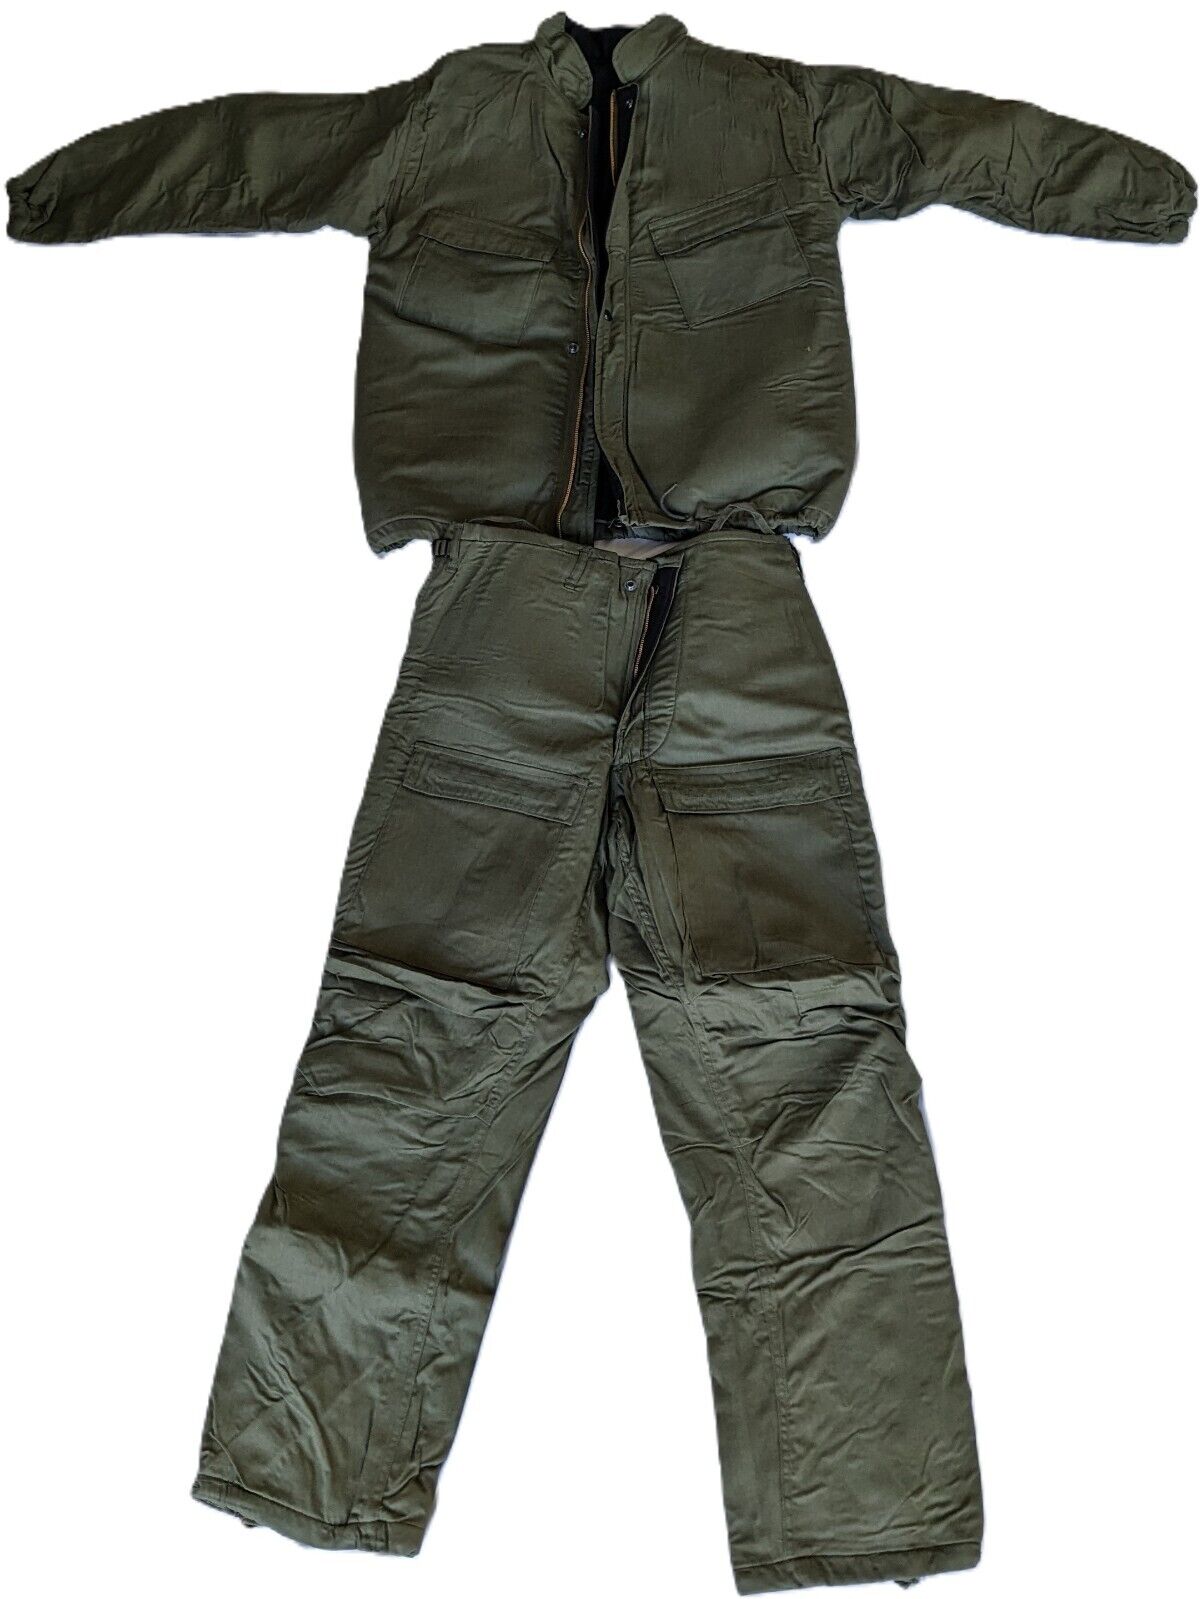 US Military Mopp Chemical Protection Suit Jacket And Pants - Size Medium